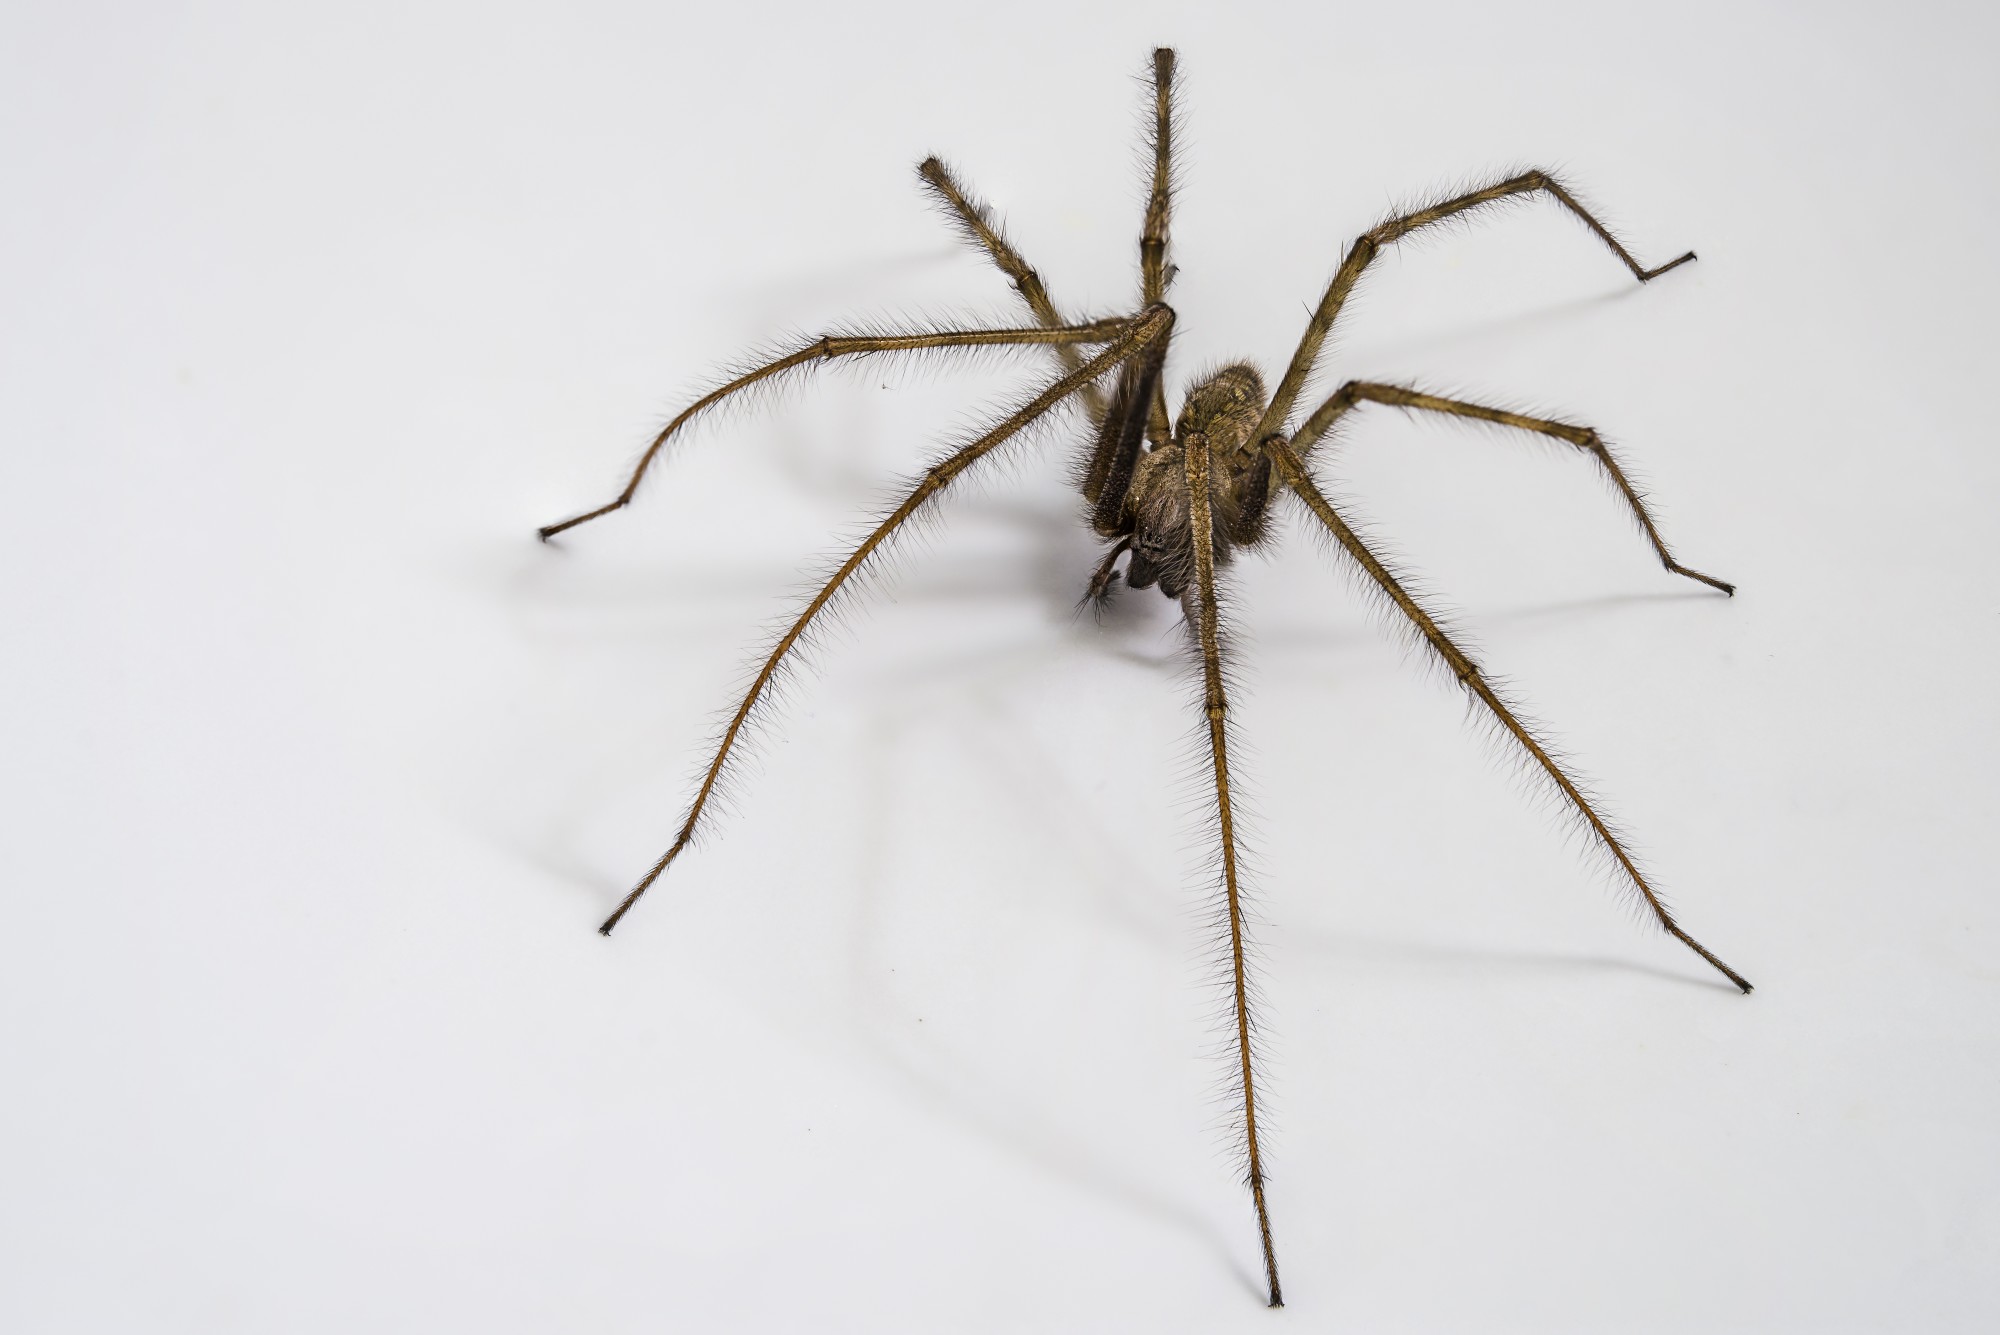 Common House Spiders: House Spider Control & Information